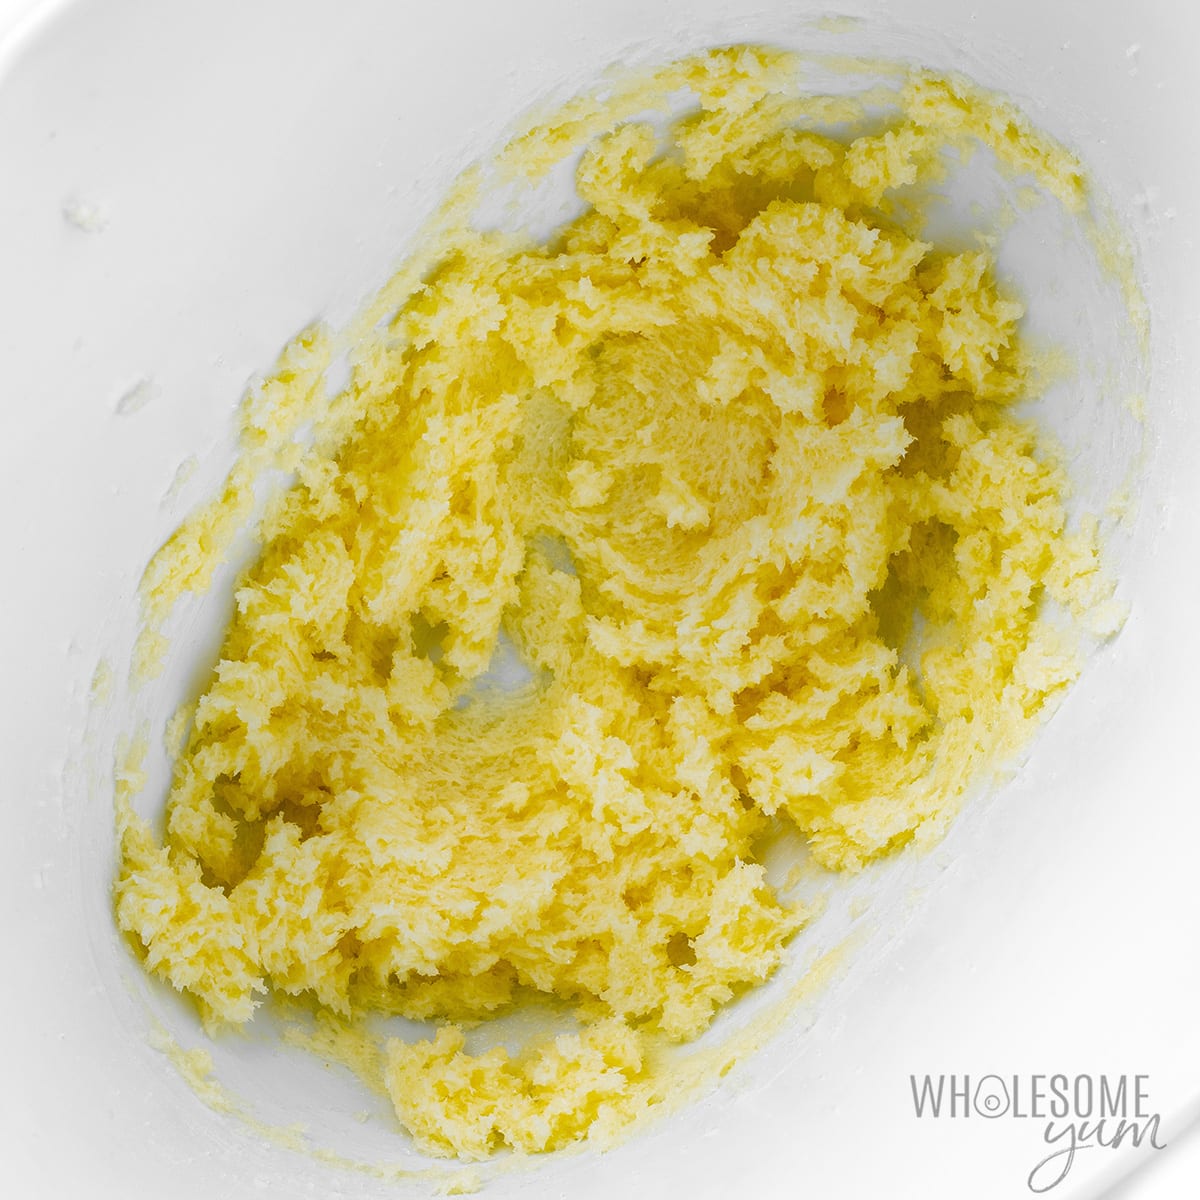 Butter and Besti beaten together in a mixing bowl.